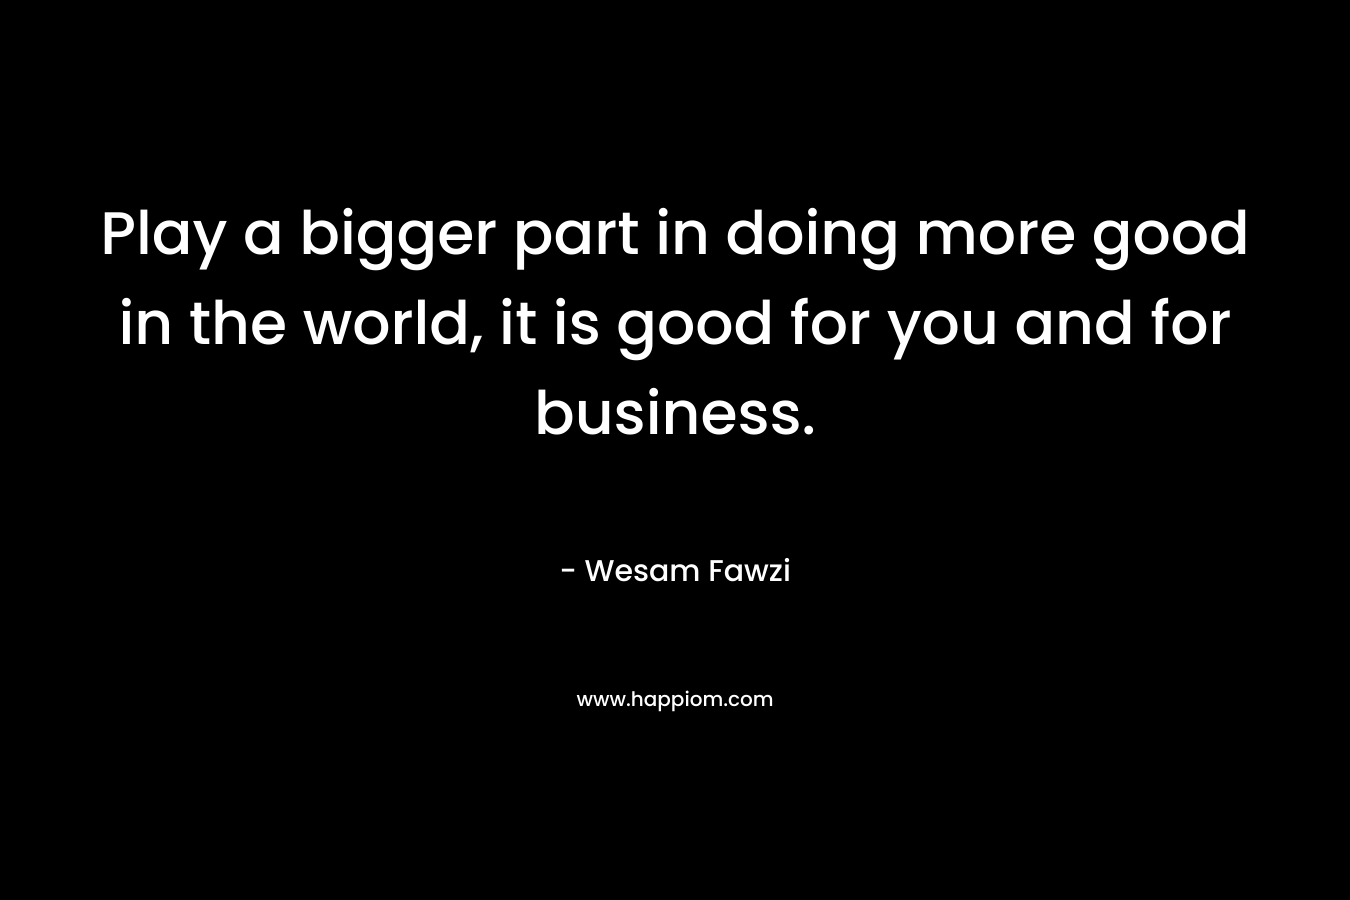 Play a bigger part in doing more good in the world, it is good for you and for business.